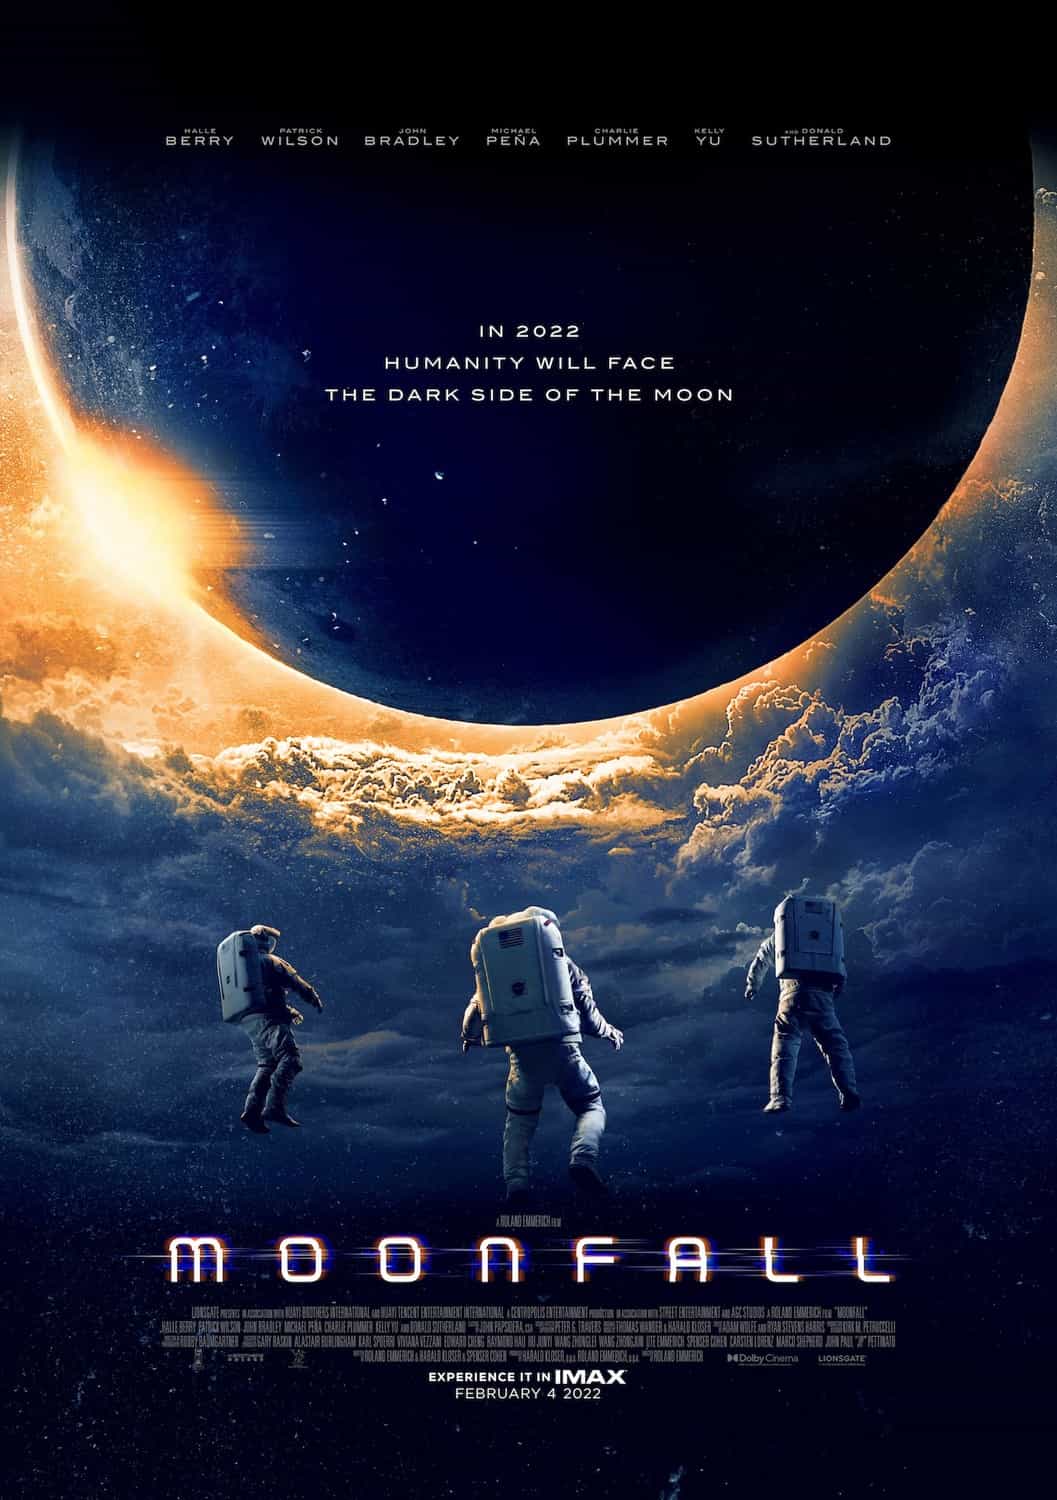 New poster released for Moonfall starring Halle Berry - movie UK release date 4th February 2022 #moonfall